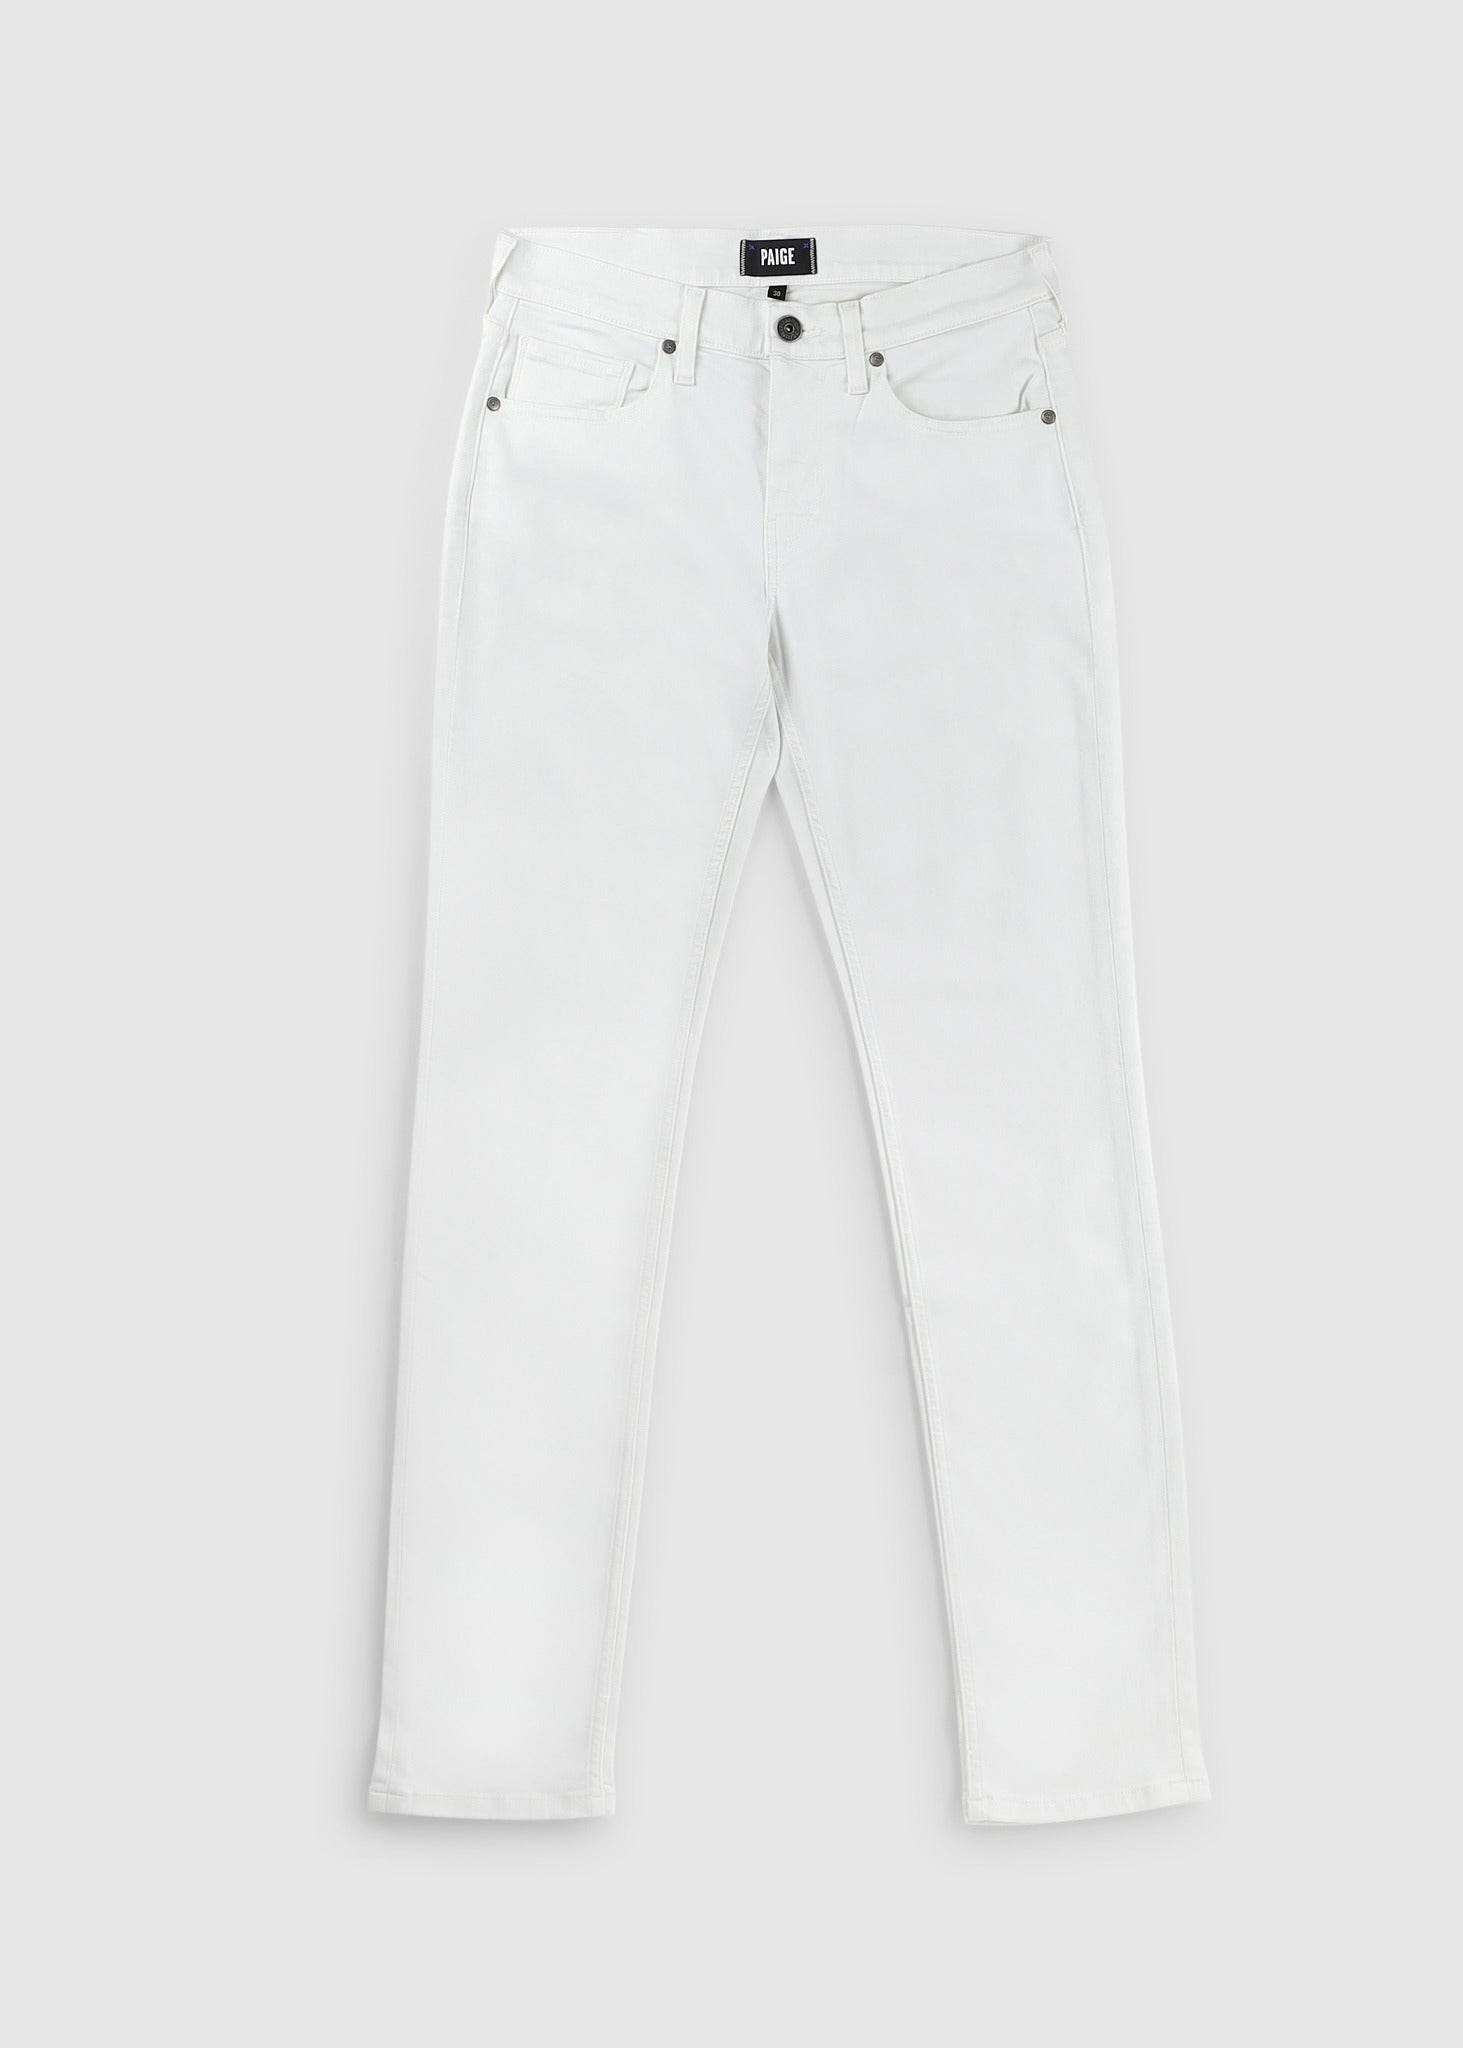 Image of Paige Mens Lennox Jeans In Icecap